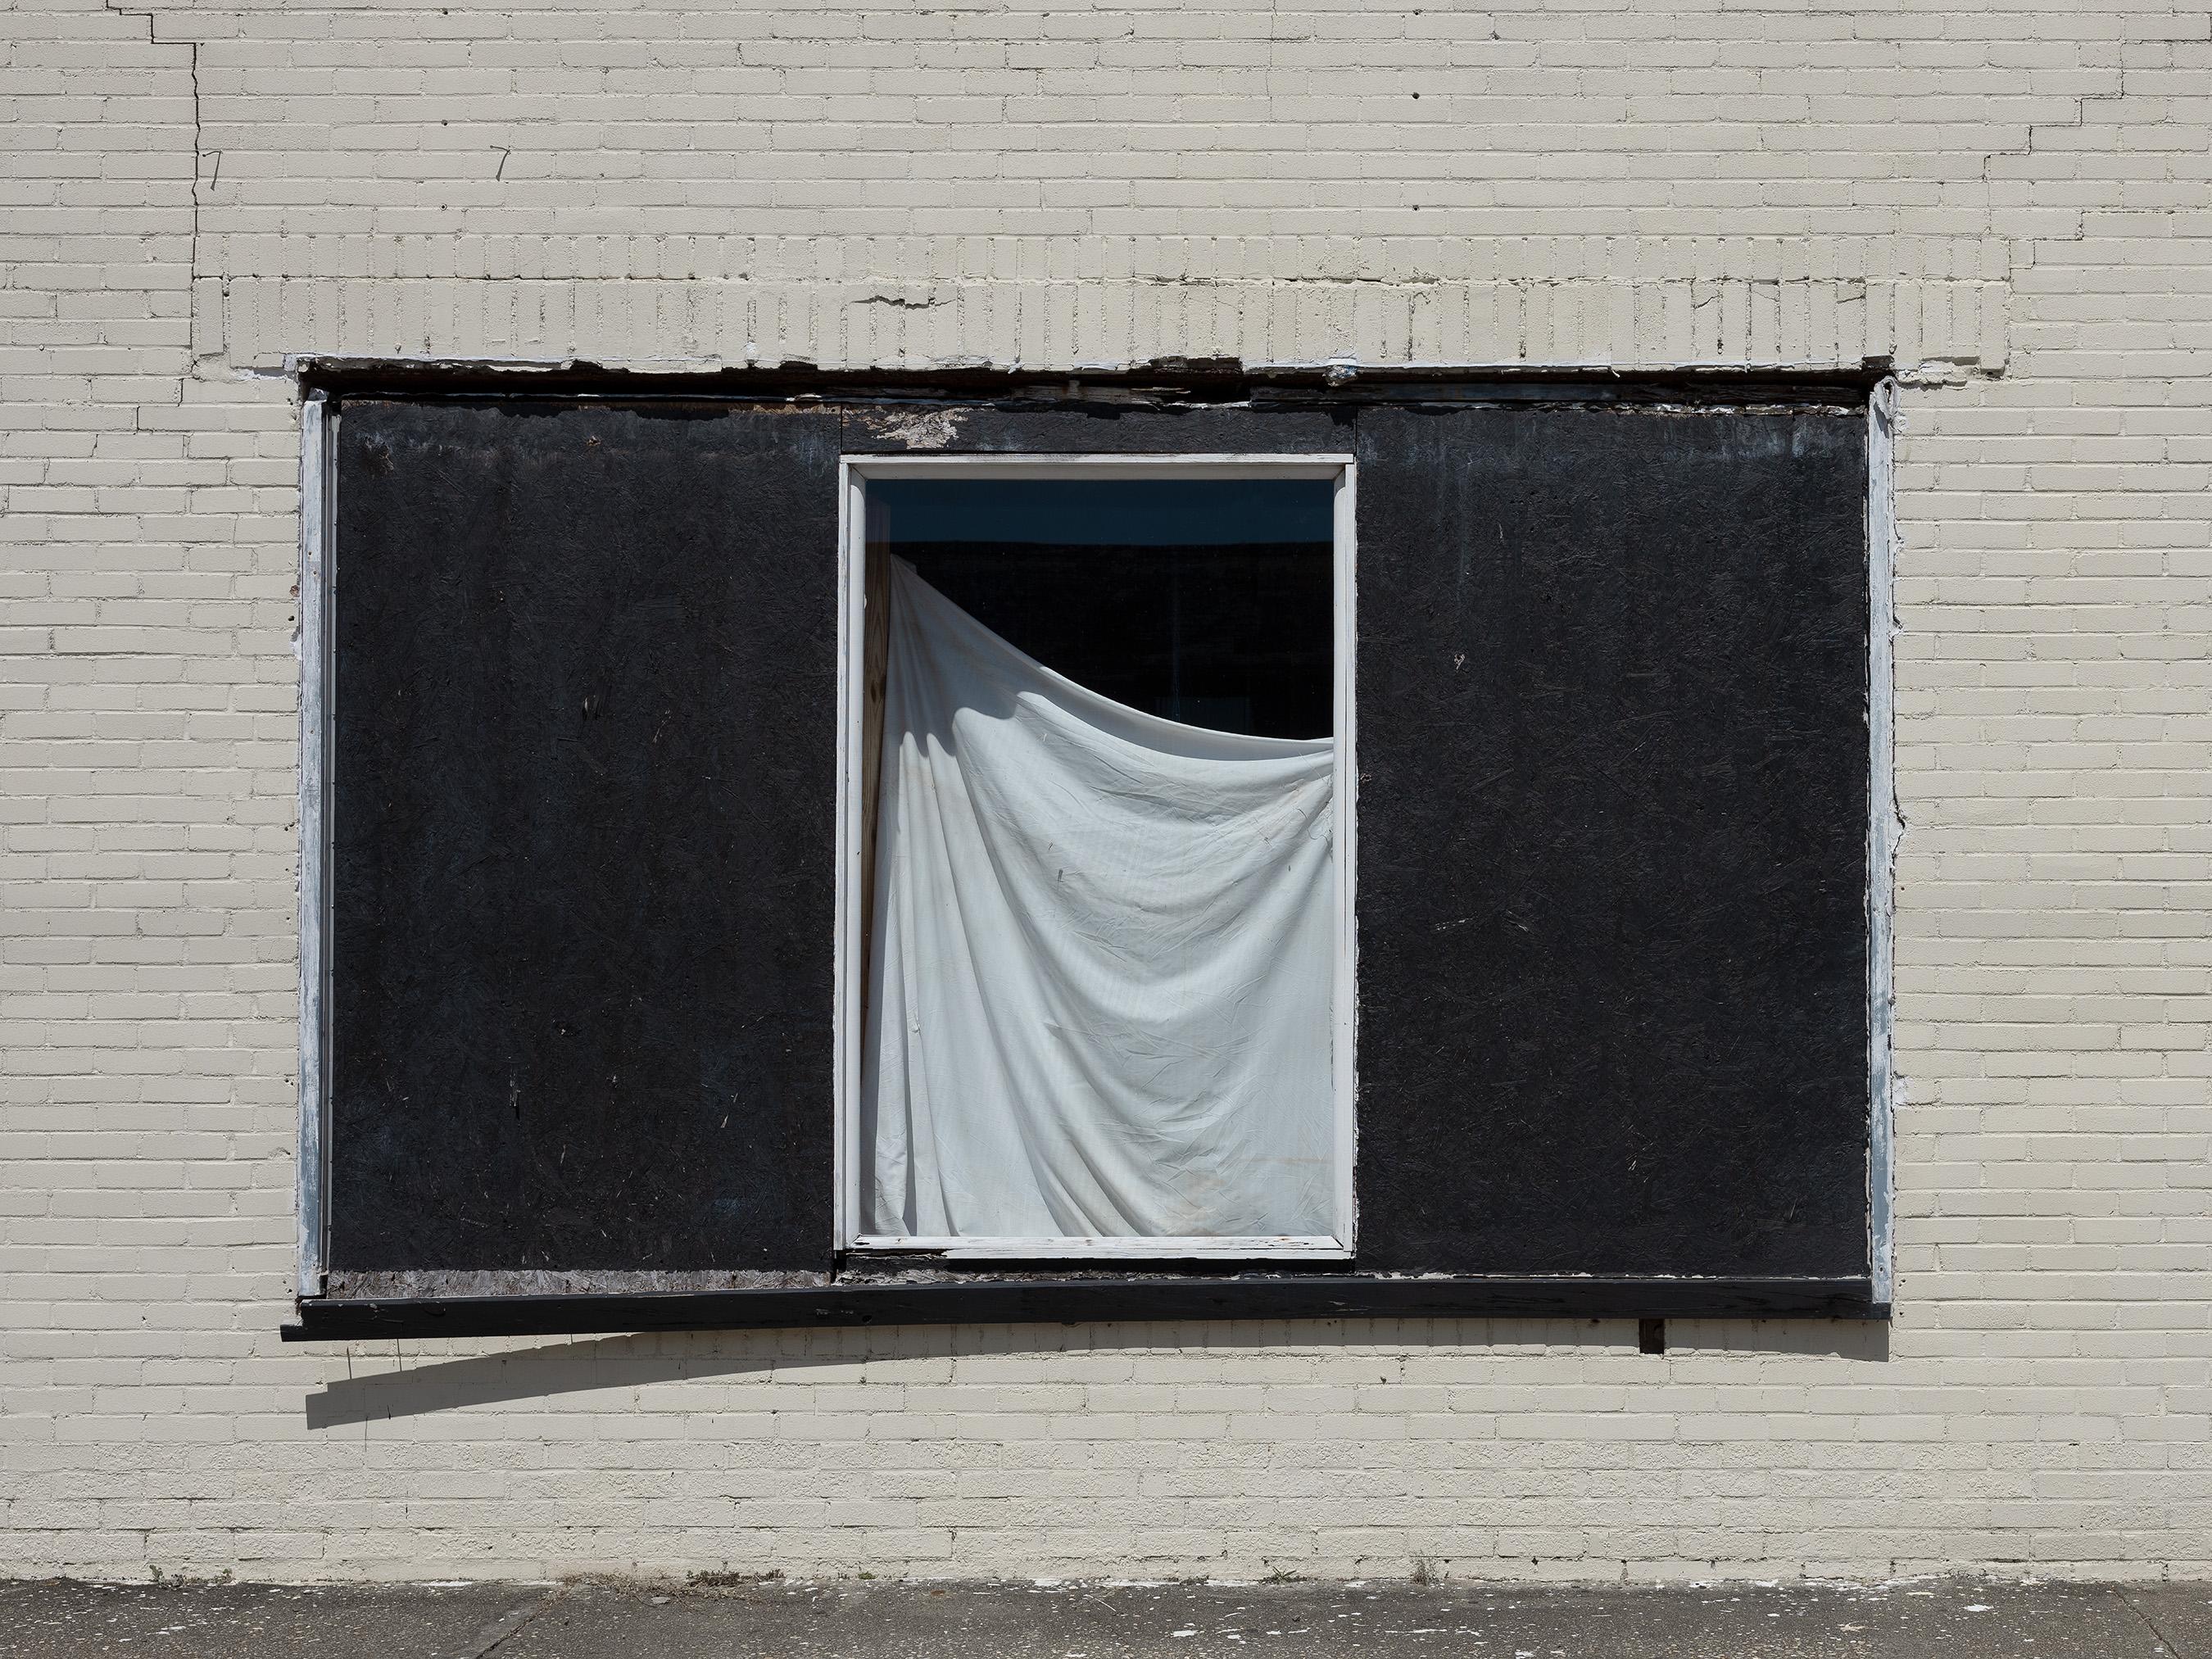 Jerry Siegel Color Photograph - "Window with Sheet" - Southern Documentary Photography - Christenberry